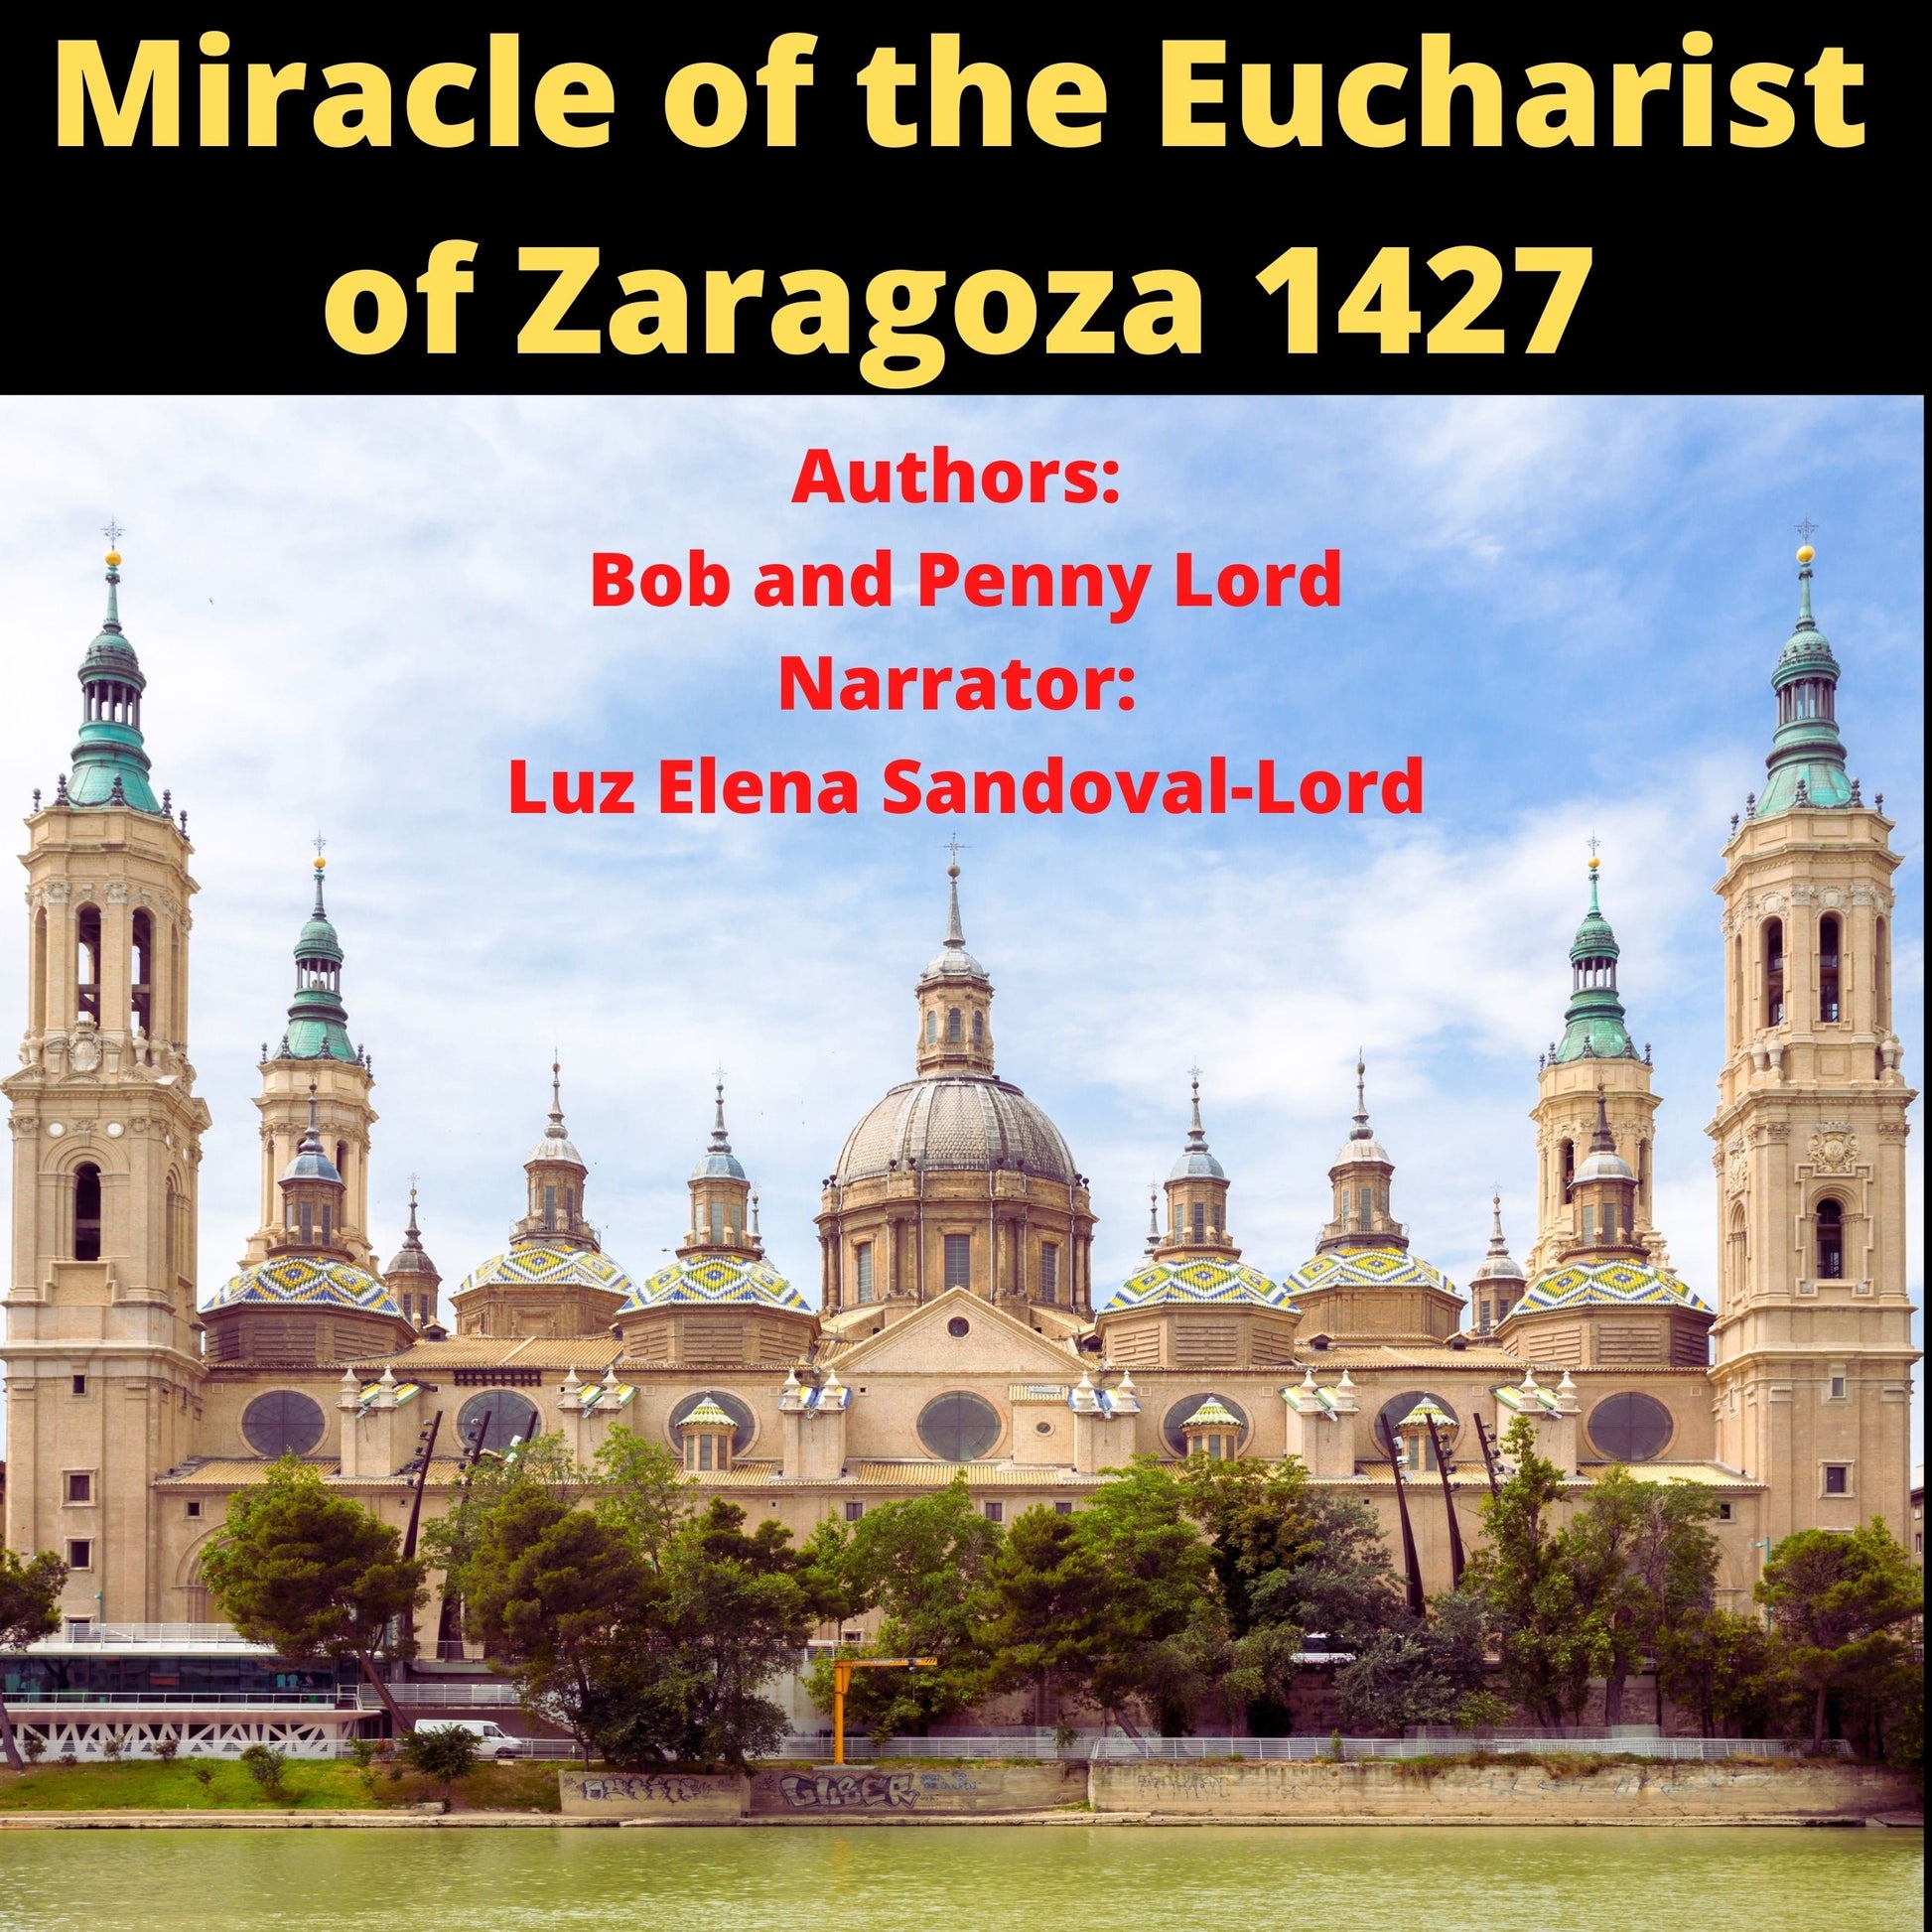 Miracle of the Eucharist of Zaragoza Audiobook - Bob and Penny Lord